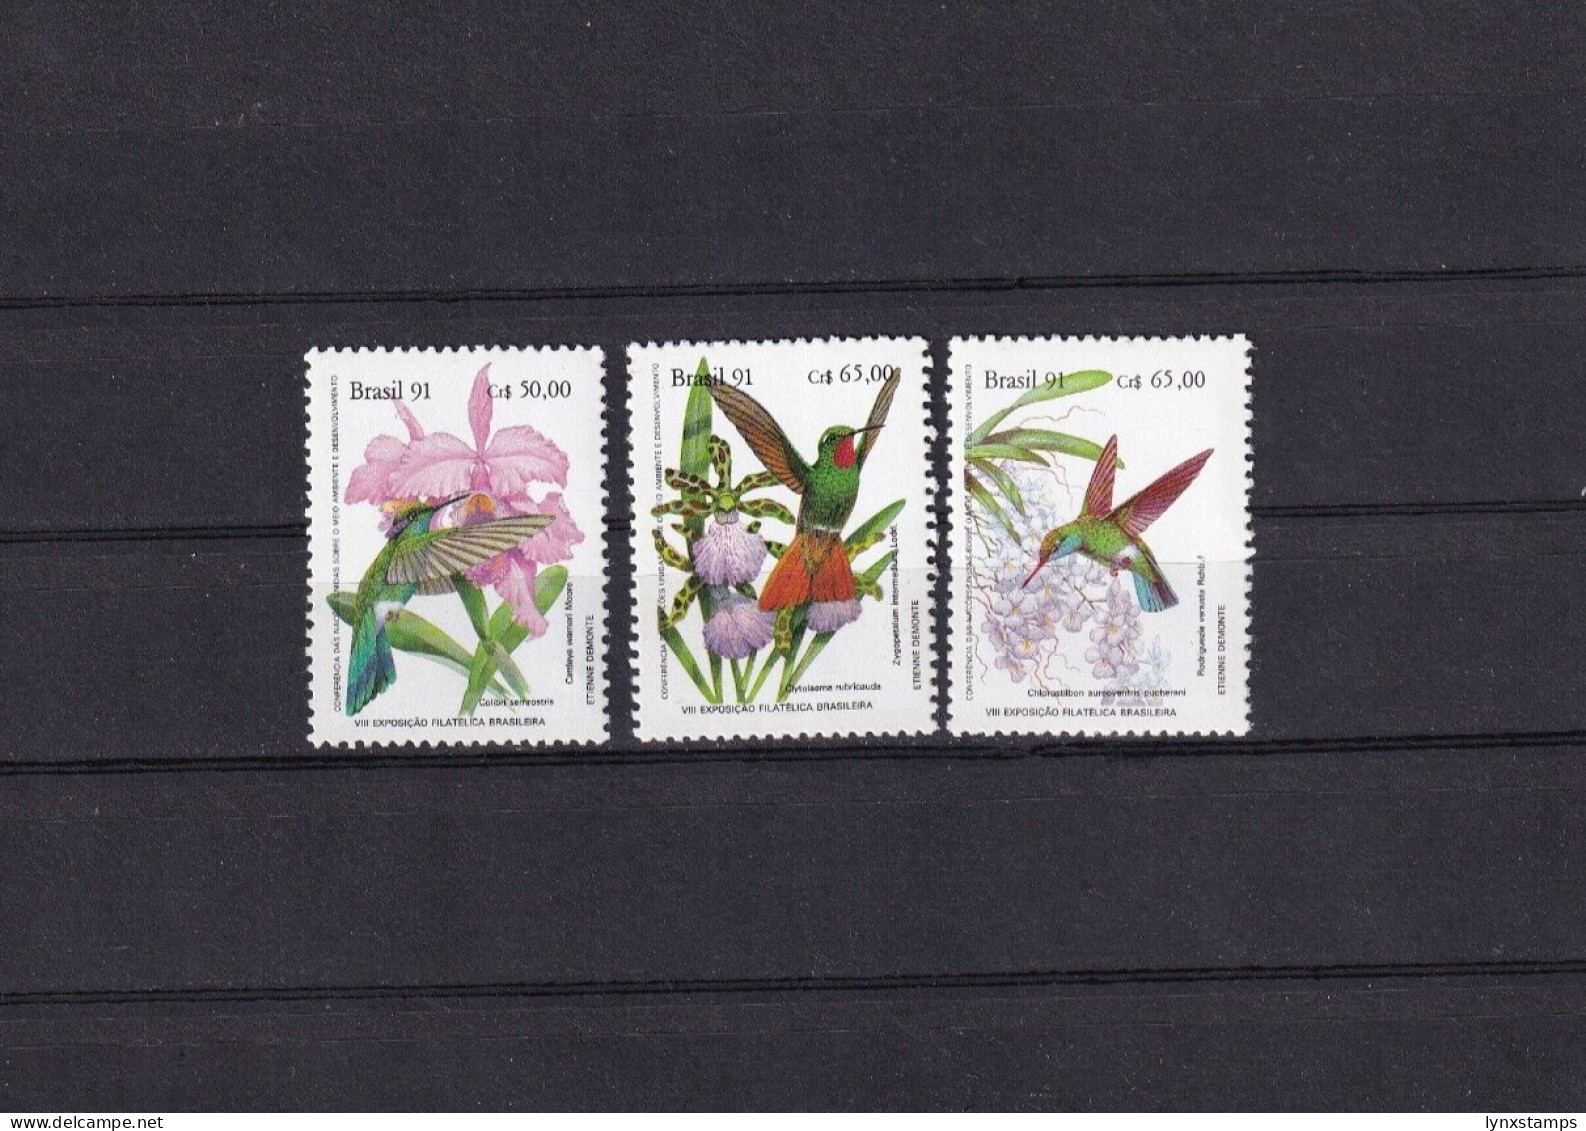 SA06 Brazil 1991 Nat Stamp Exhibition "Brapex 91"-Orchids And Birds Mint Stamps - Unused Stamps